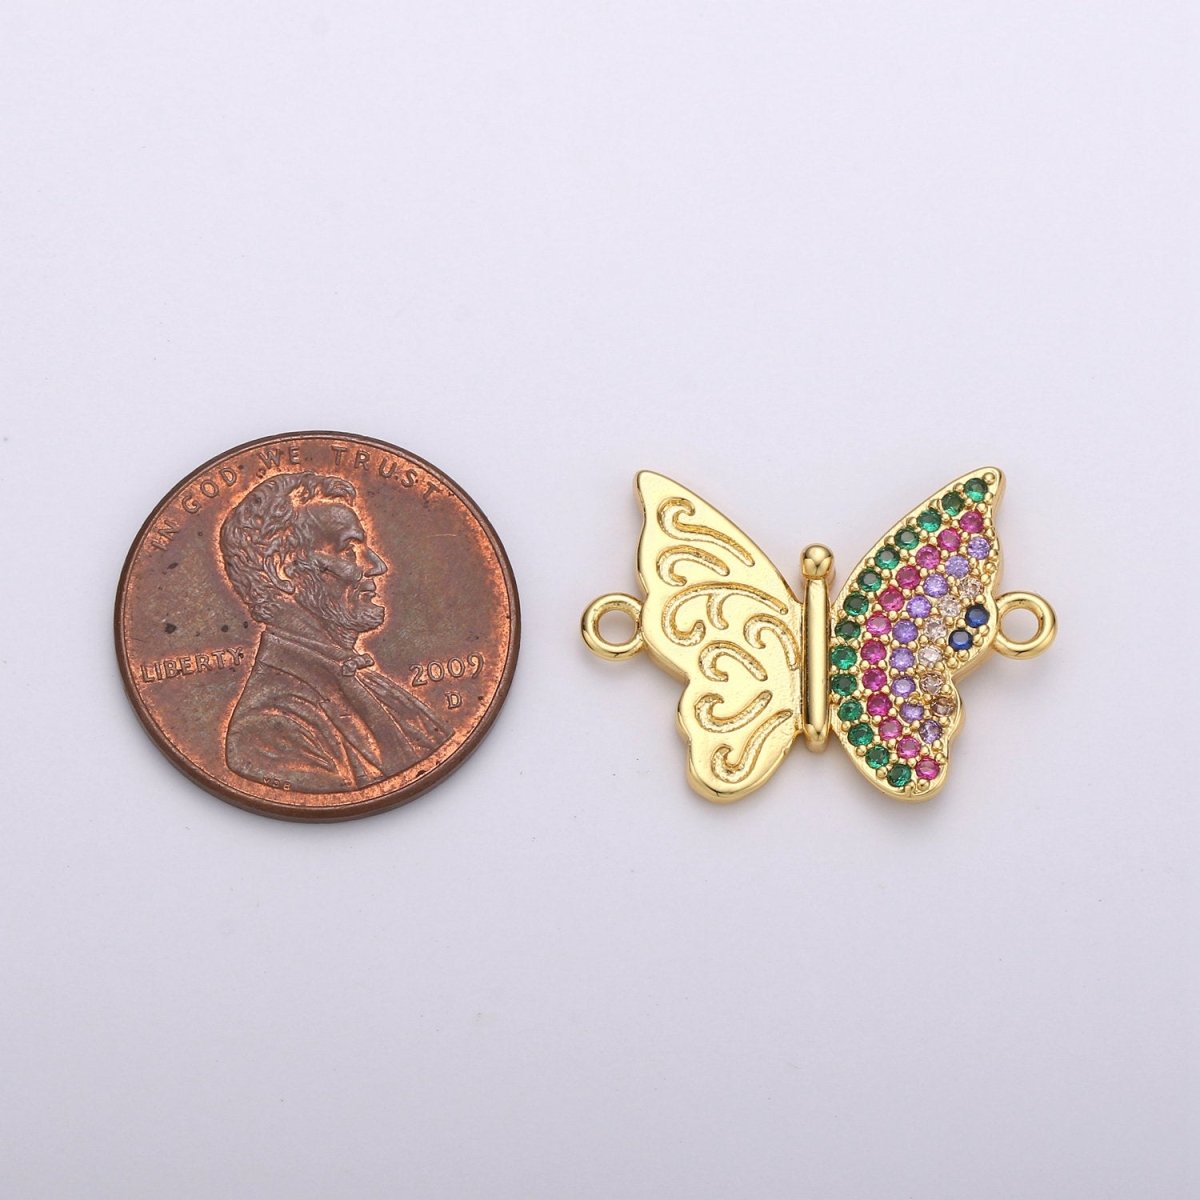 Gold Butterfly Charm Connector, Micro Pave Mariposa Charm, CZ Charms, Cubic Zirconia Butterfly, Micro Pave Link Bracelet Connector F-395 - DLUXCA